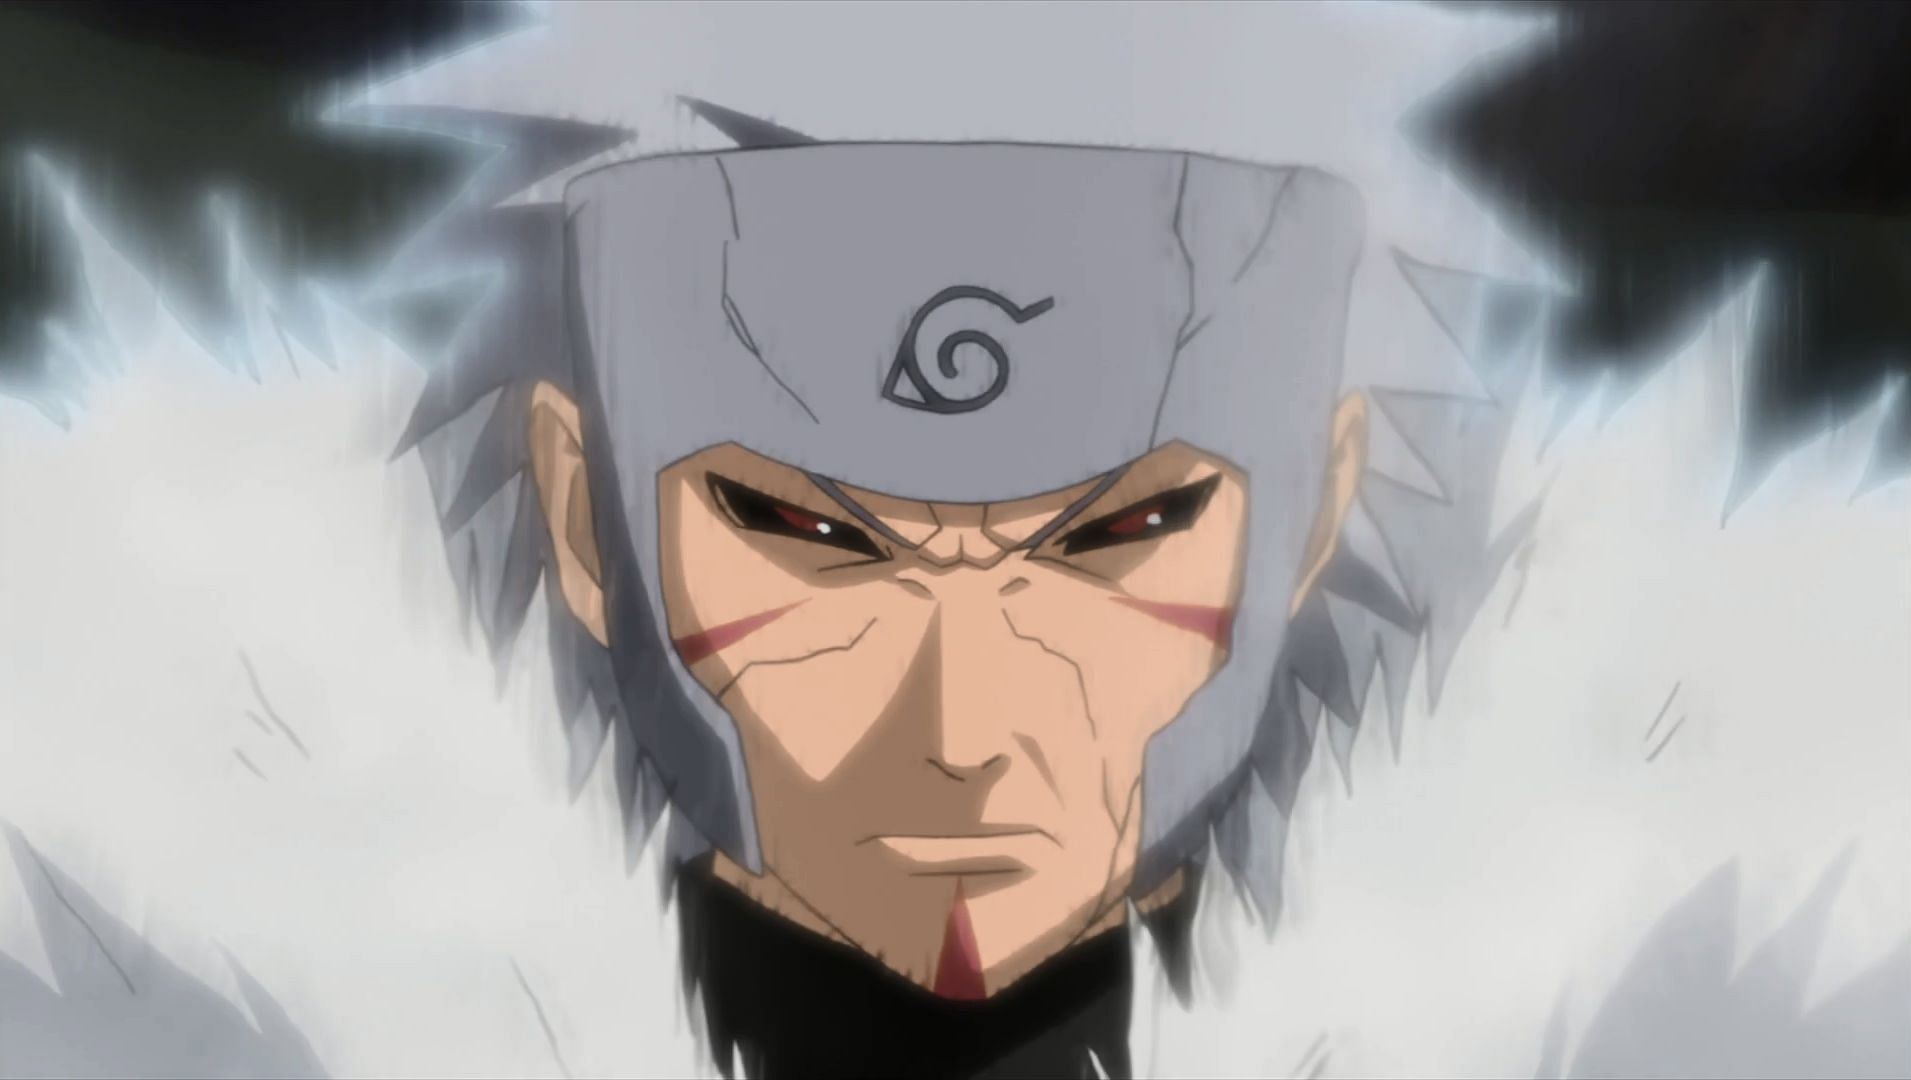 Some of the characters in Naruto have invented jutsus (Image via Naruto)